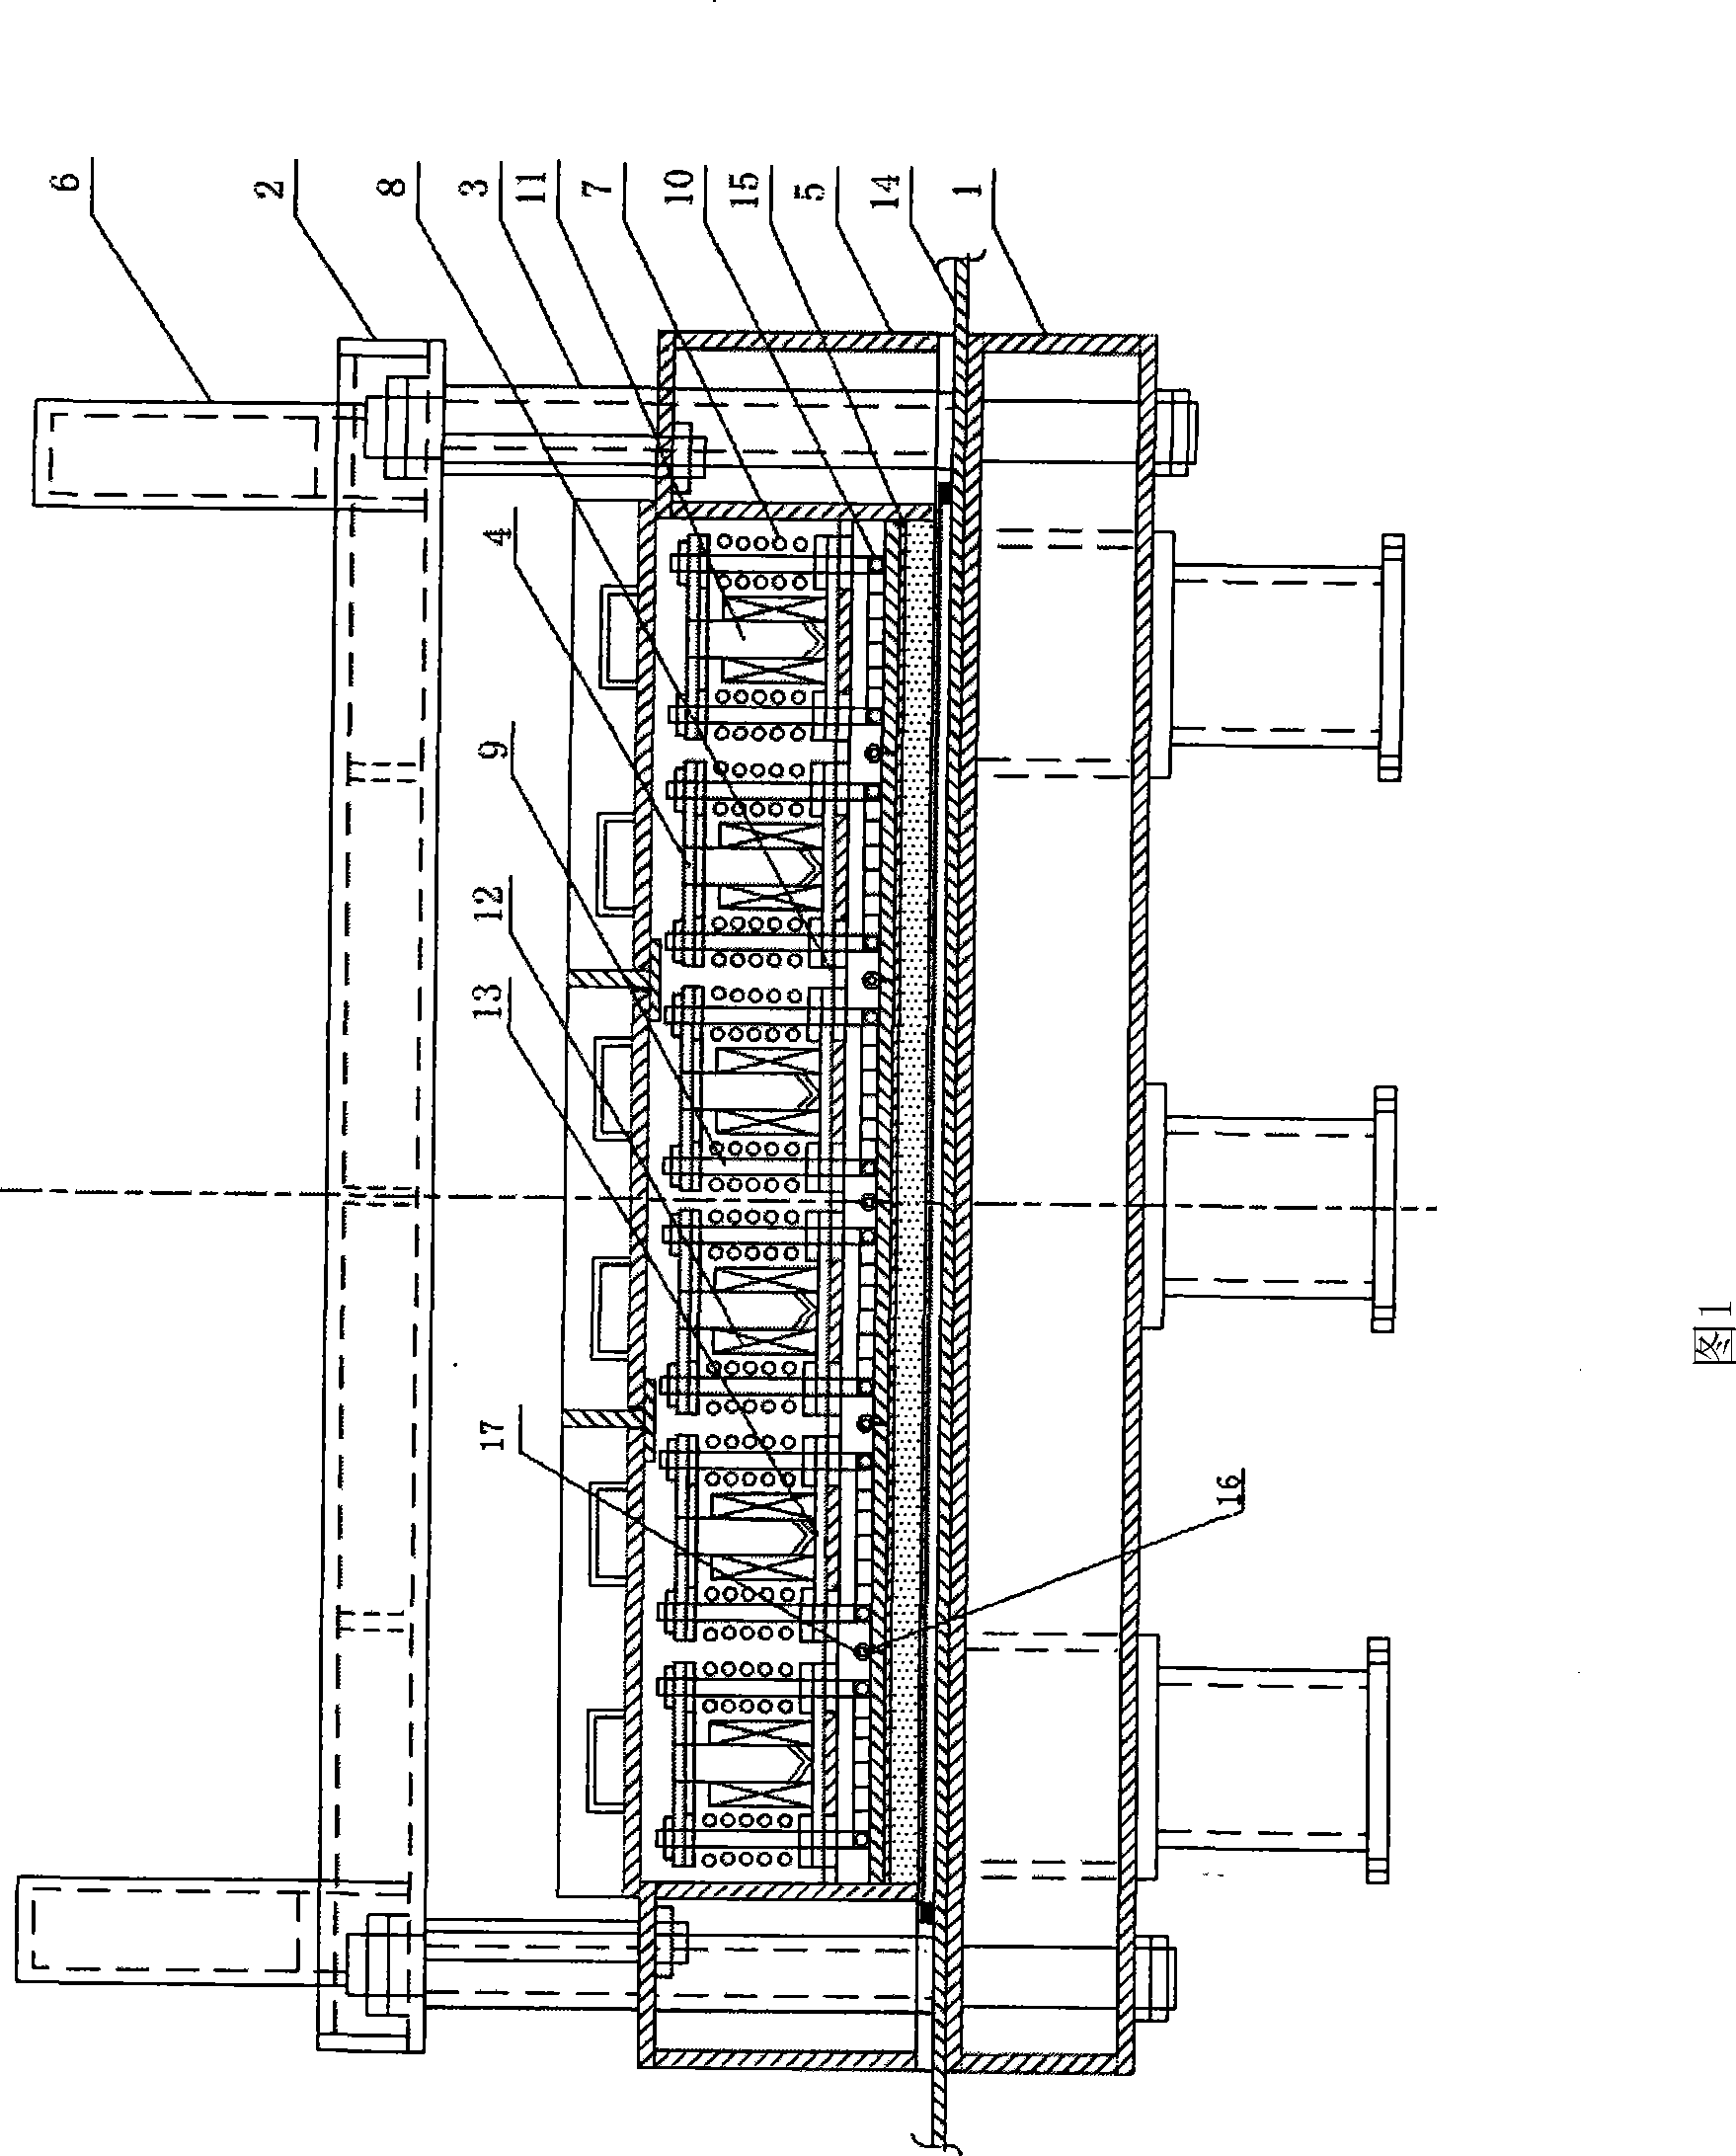 Electromagnetic combined apparatus for synthesizing stone pressure plate